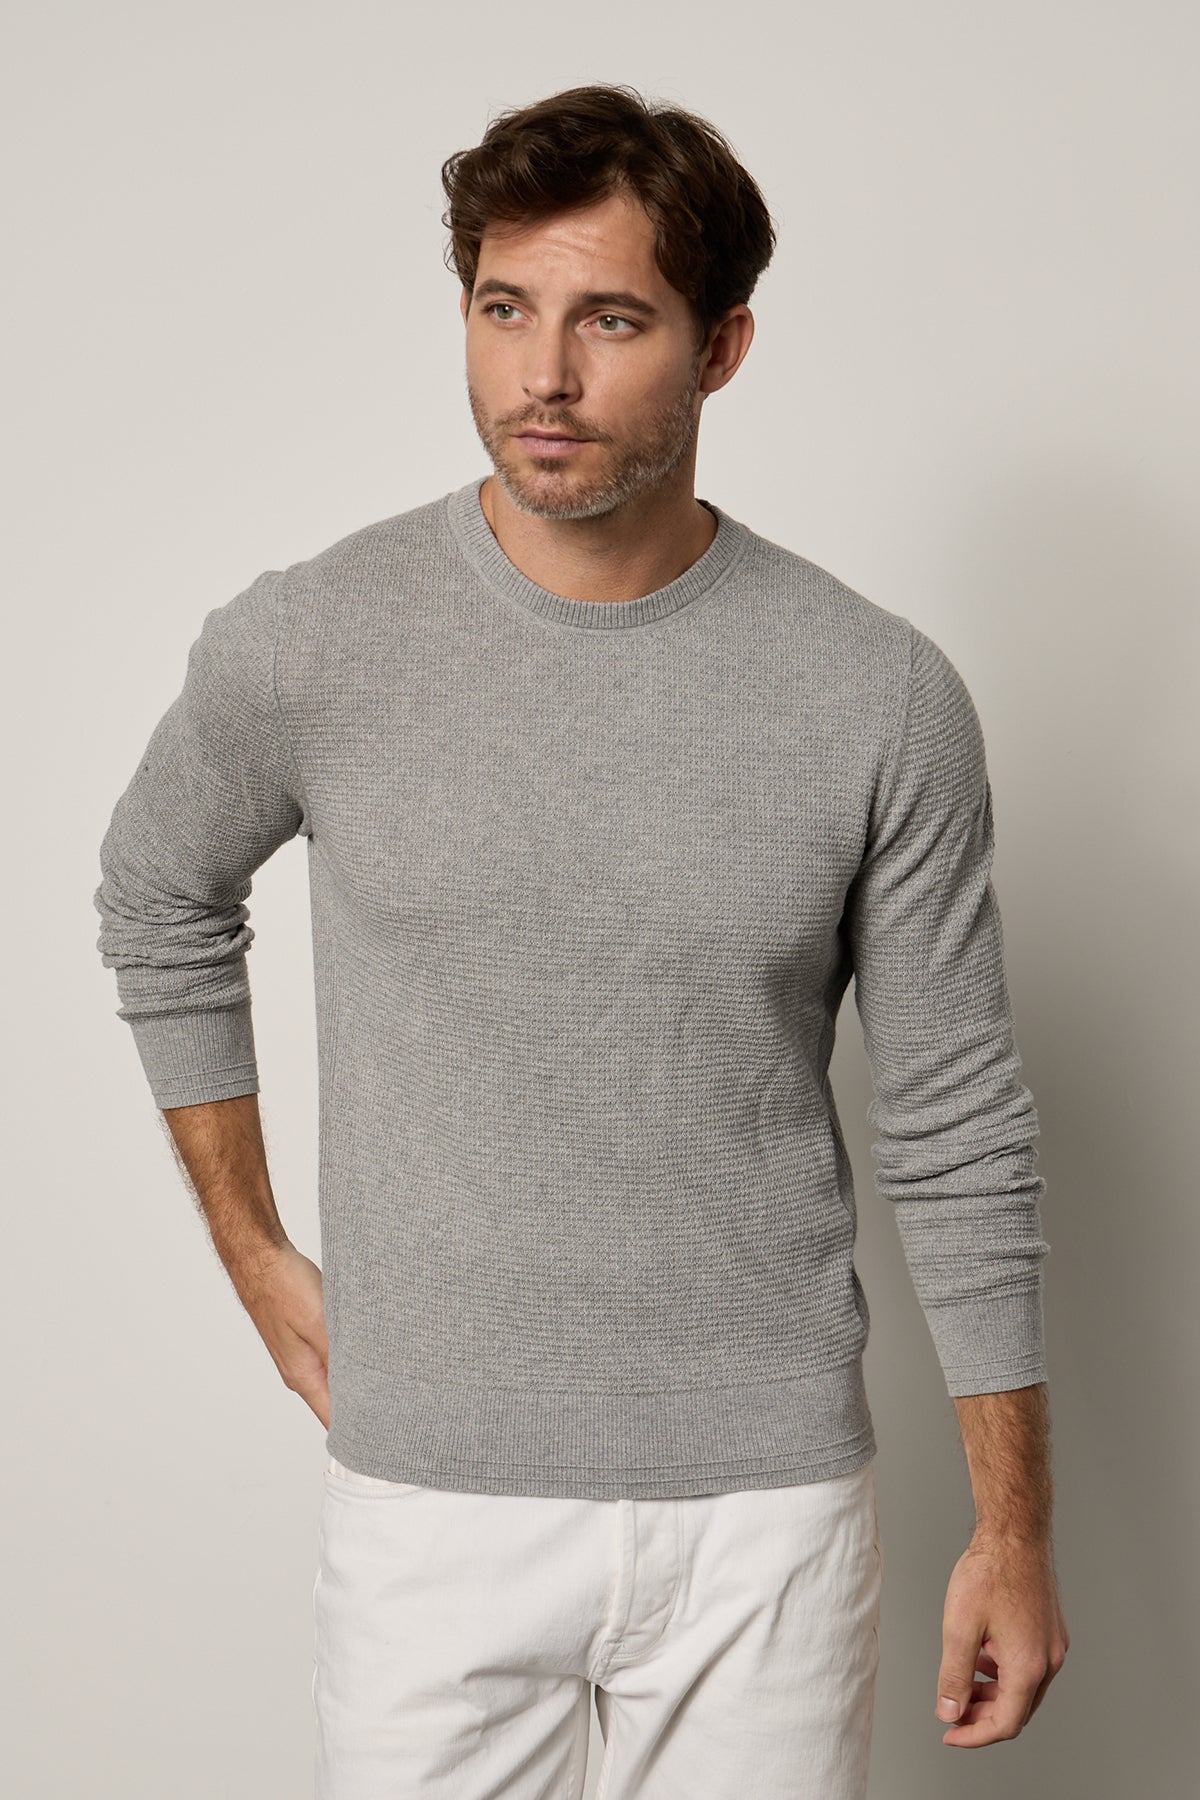 Ace Thermal Crew in heather grey with white denim front-25943733534913